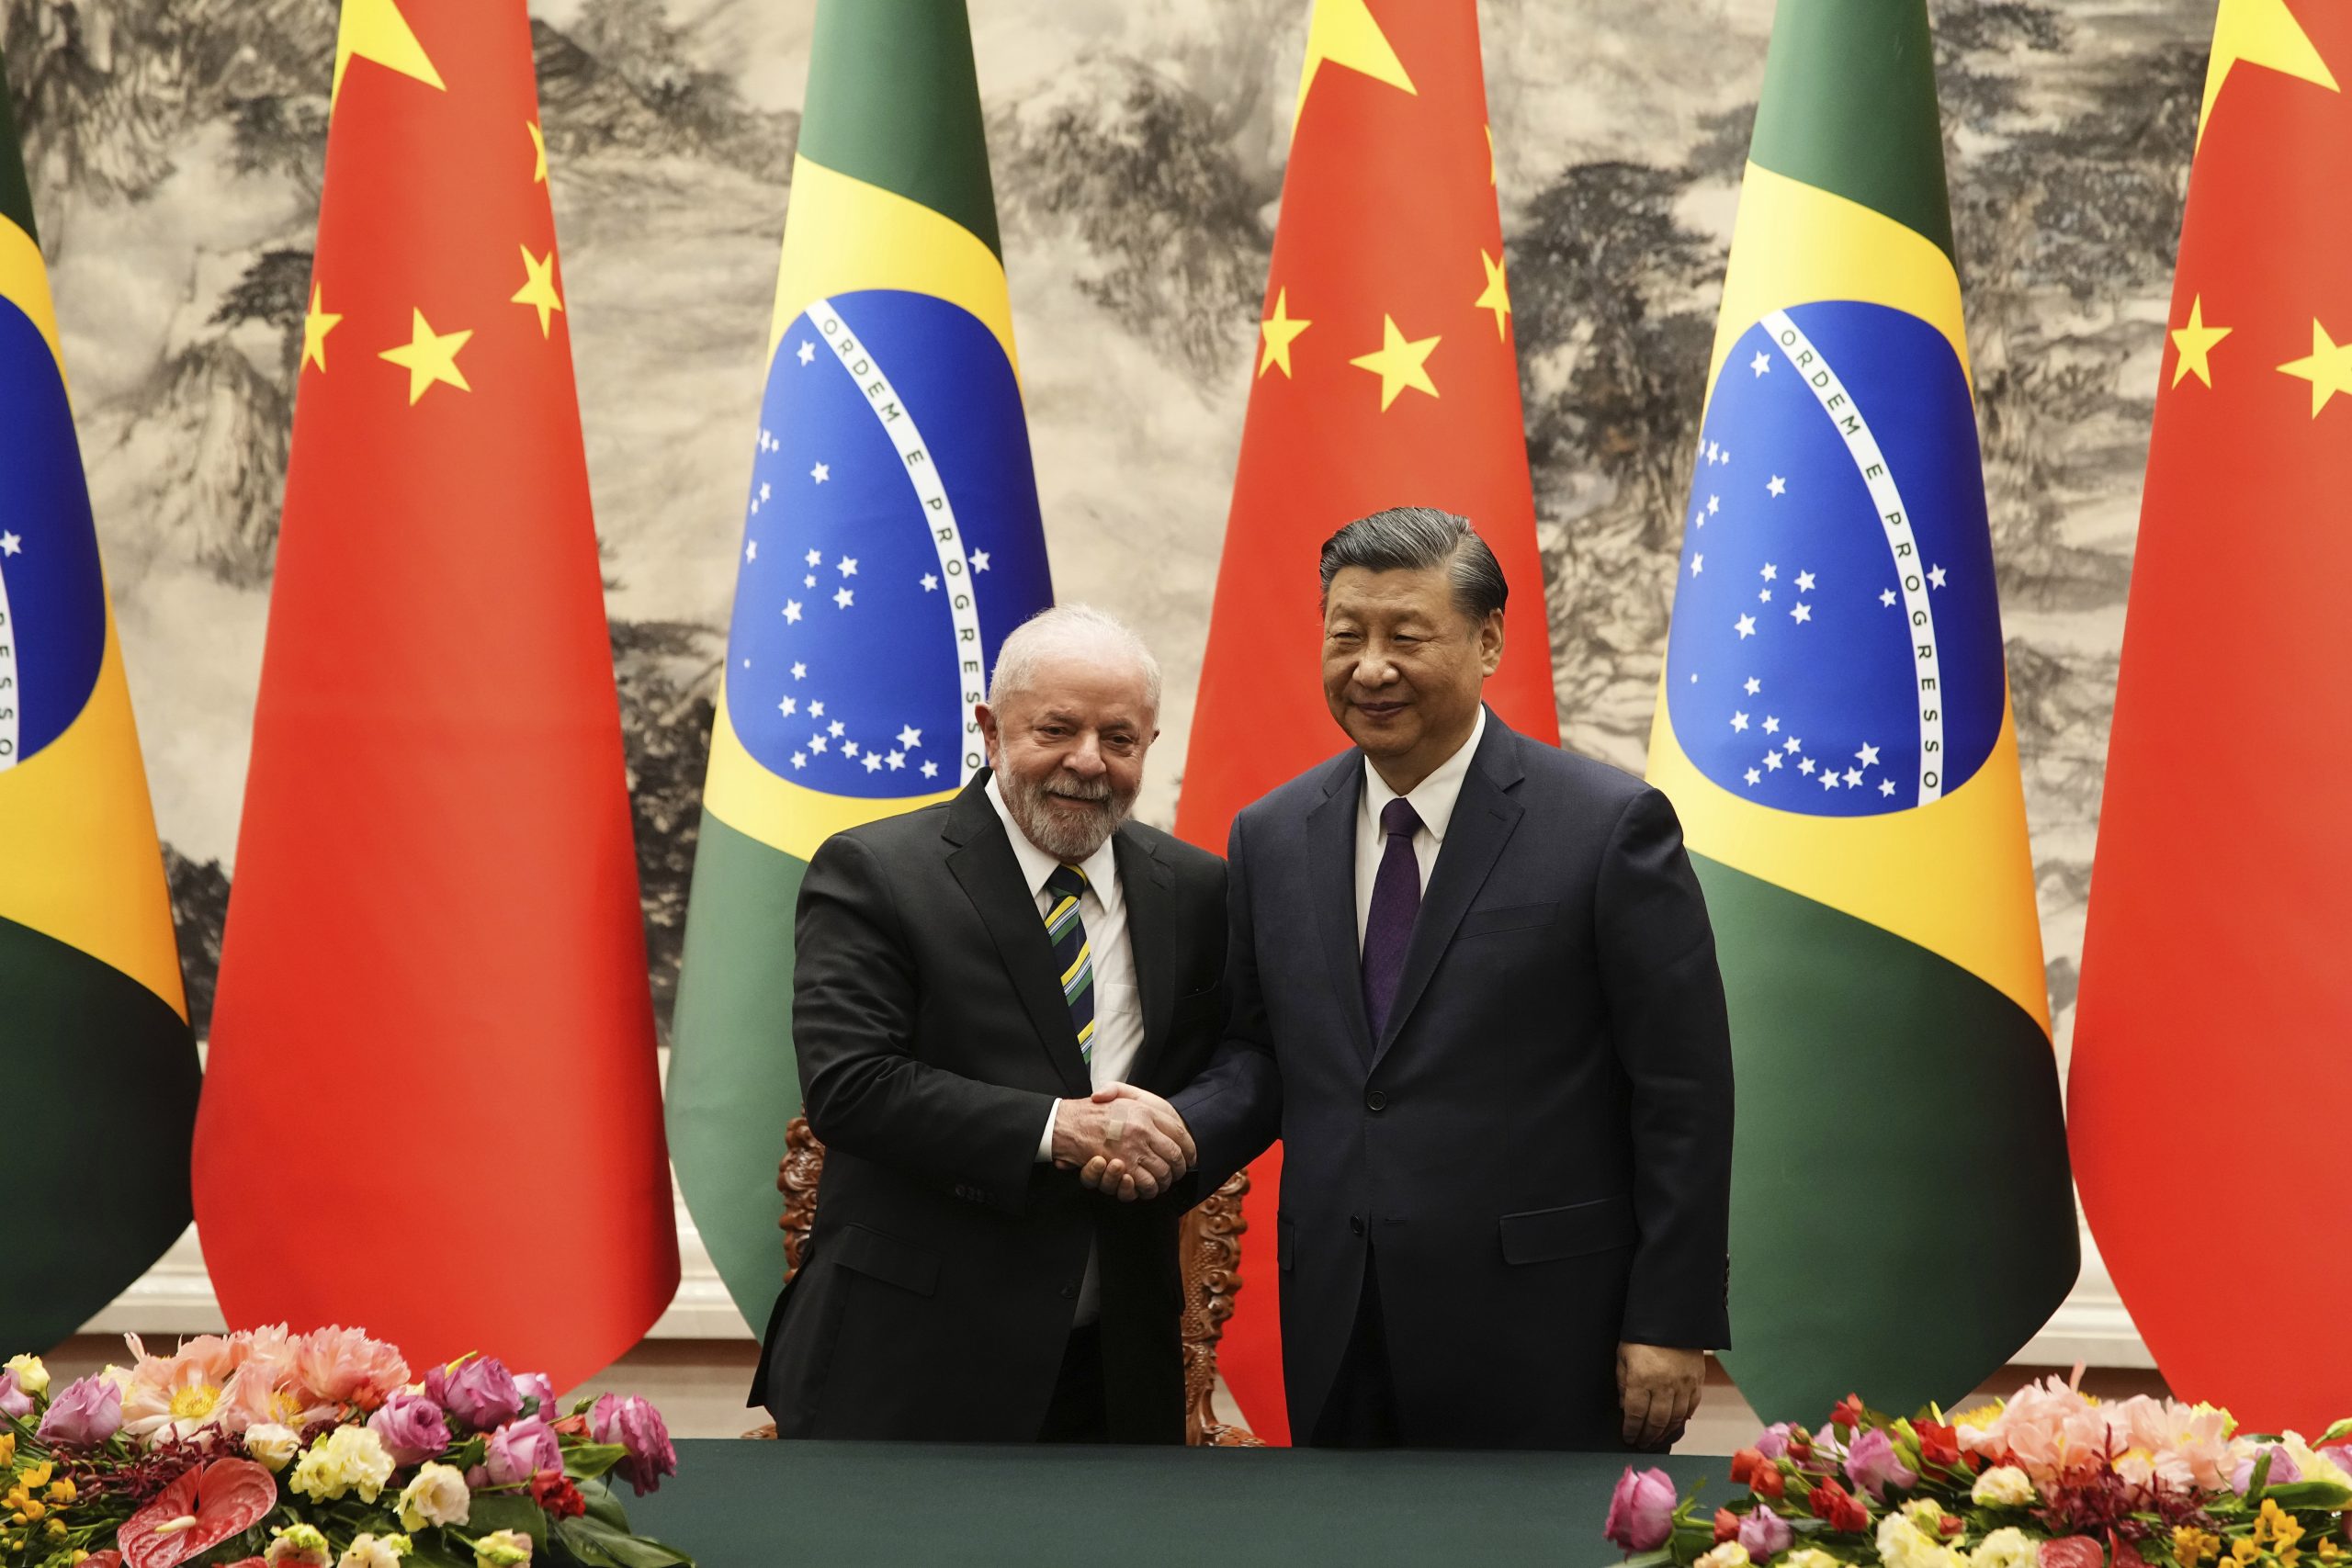 IntelBrief: Brazilian Lula Bolsters Relations With China, Makes Forays Into Geopolitics